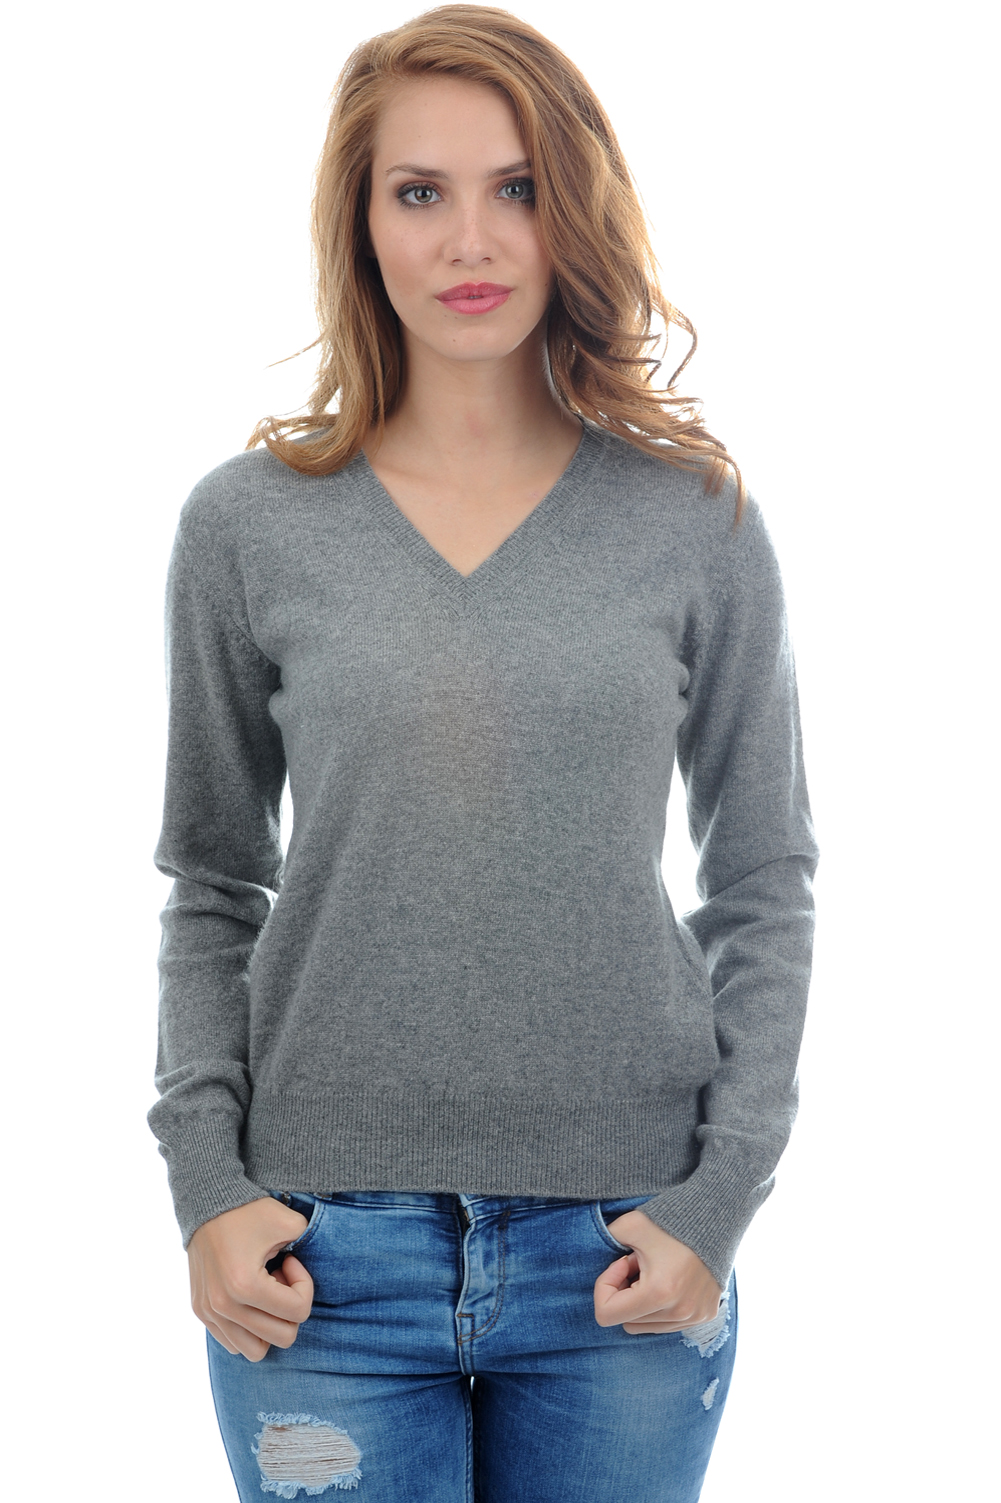 Cachemire pull femme col v faustine gris chine 4xl